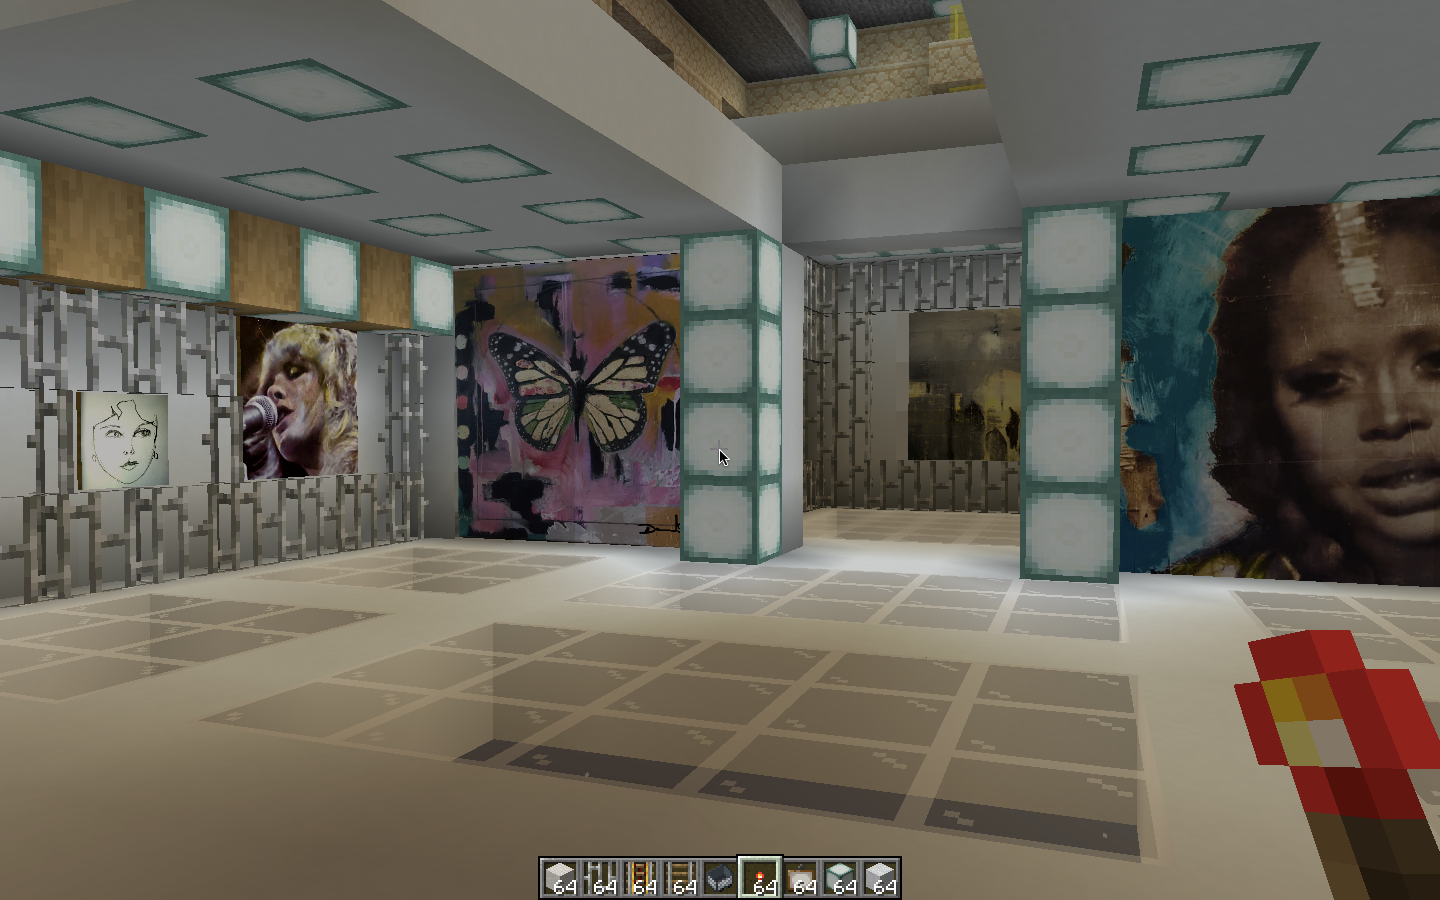 An exhibition by Damali Young at the virtual konstmuseum in malmö on the NGBG Minecraft server